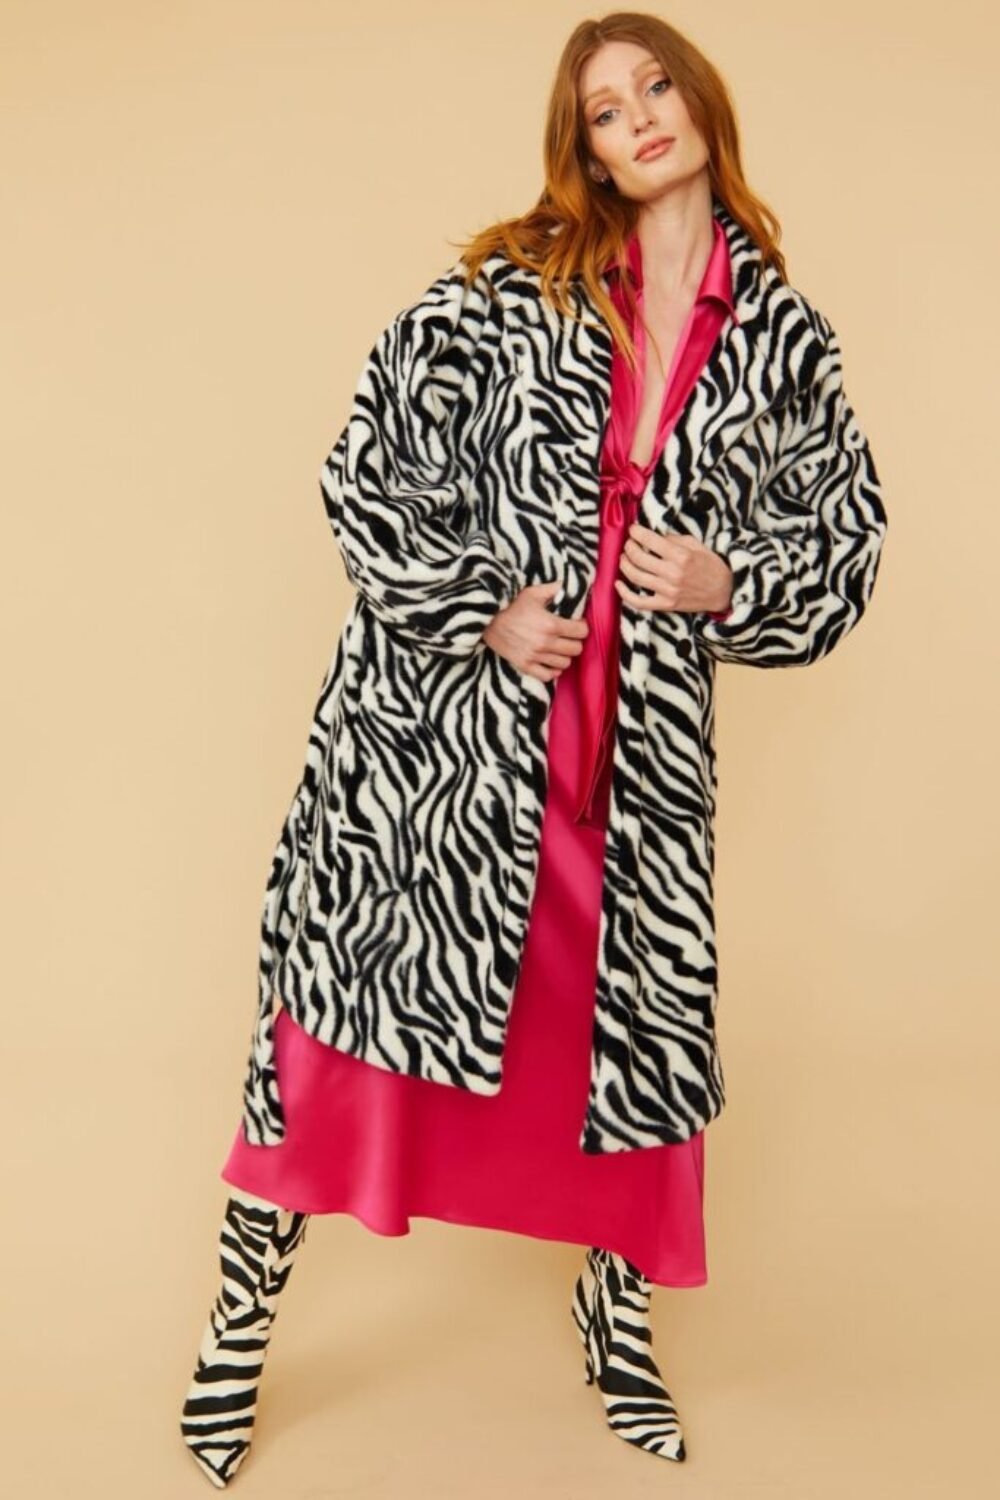 Shop Lux Faux Fur Zebra Print Midi Coat with Belt and women's luxury and designer clothes at www.lux-apparel.co.uk